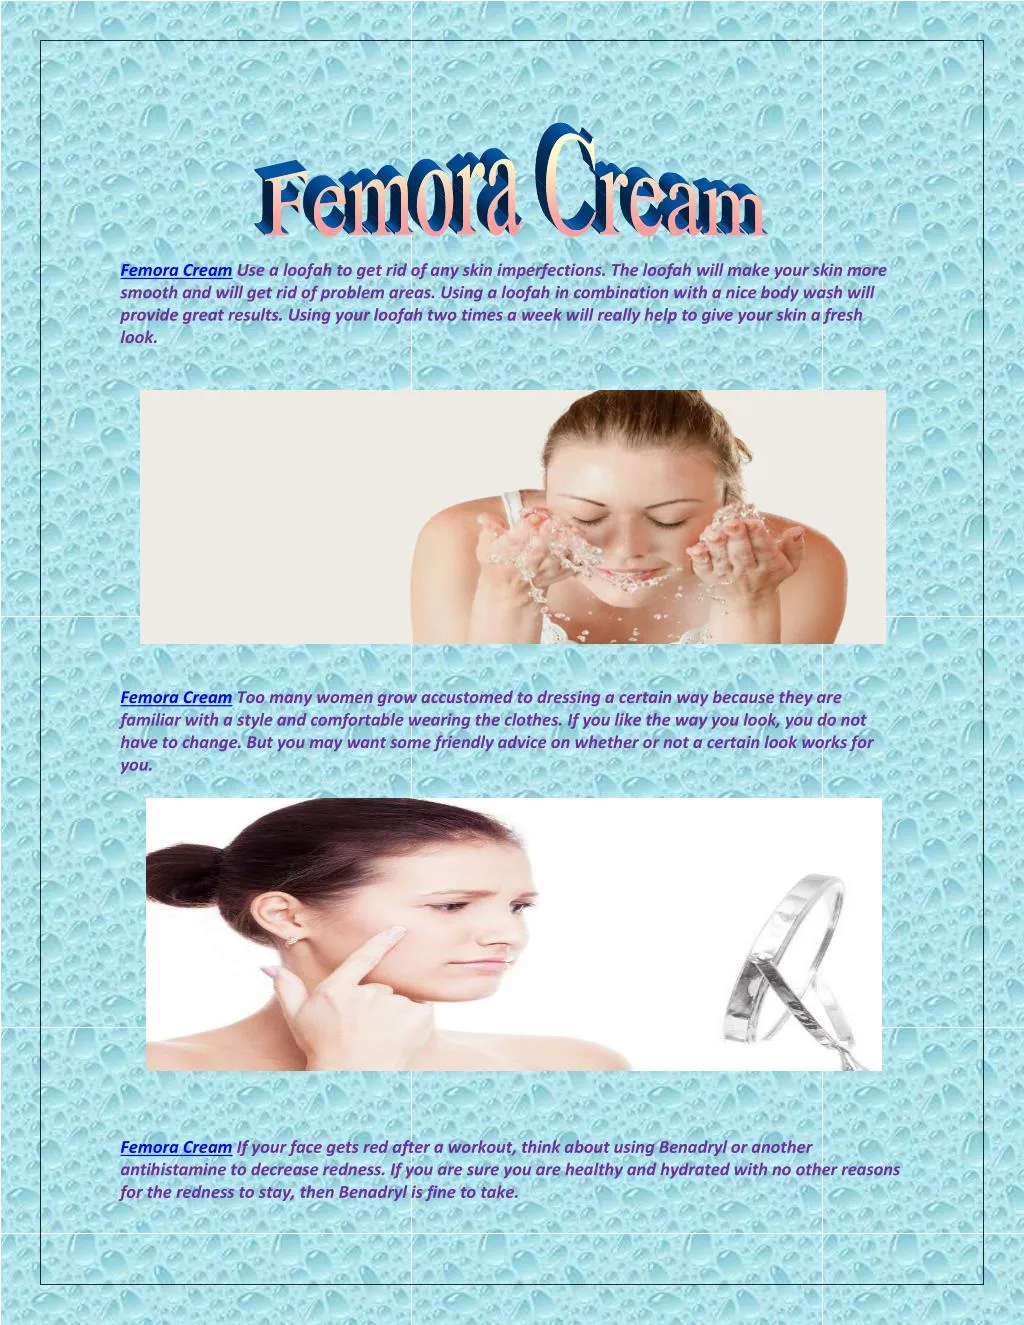 femora cream use a loofah to get rid of any skin